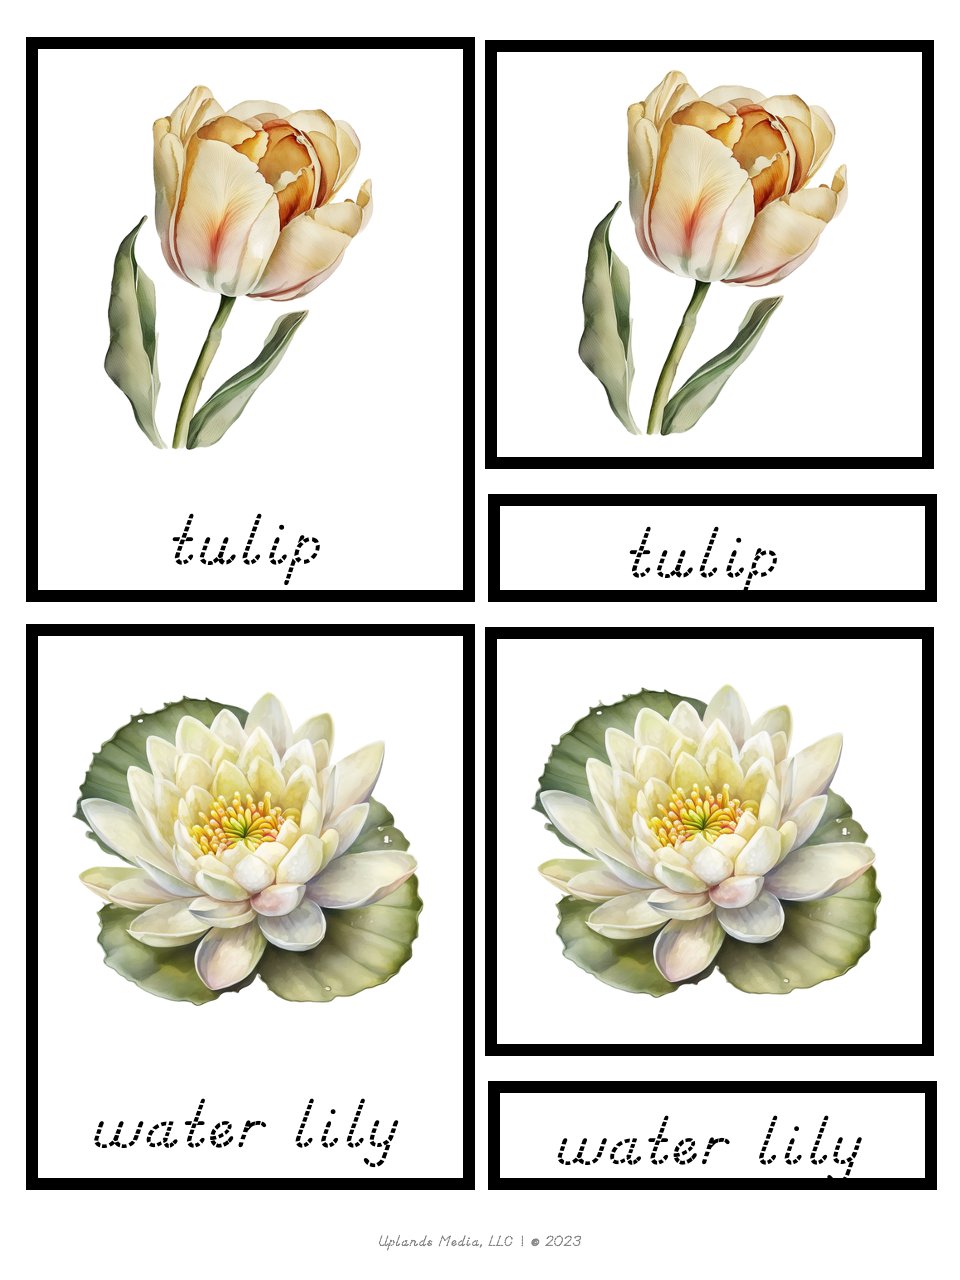 [3 Part Cards] Types of Flowers - Printables by Carrots Are Orange